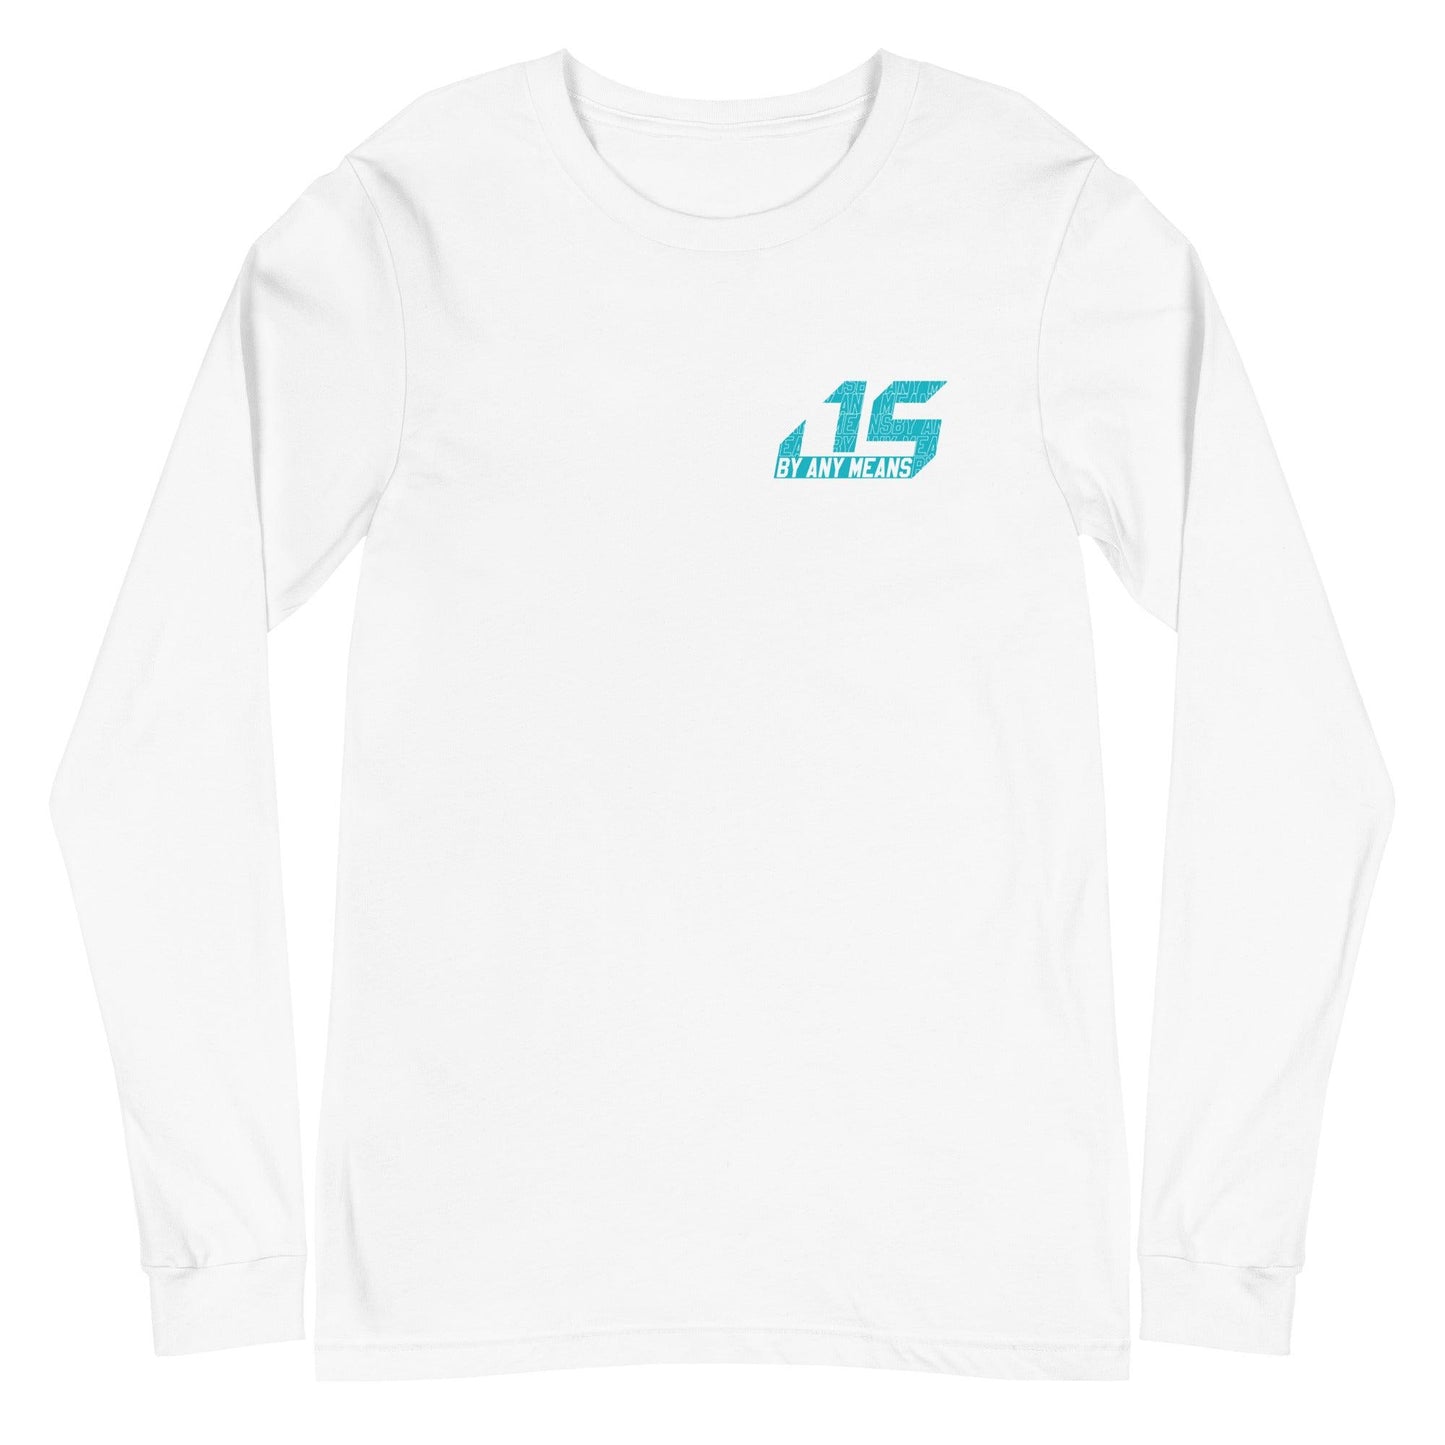 Jai Smith "By Any Means" Long Sleeve Tee - Fan Arch